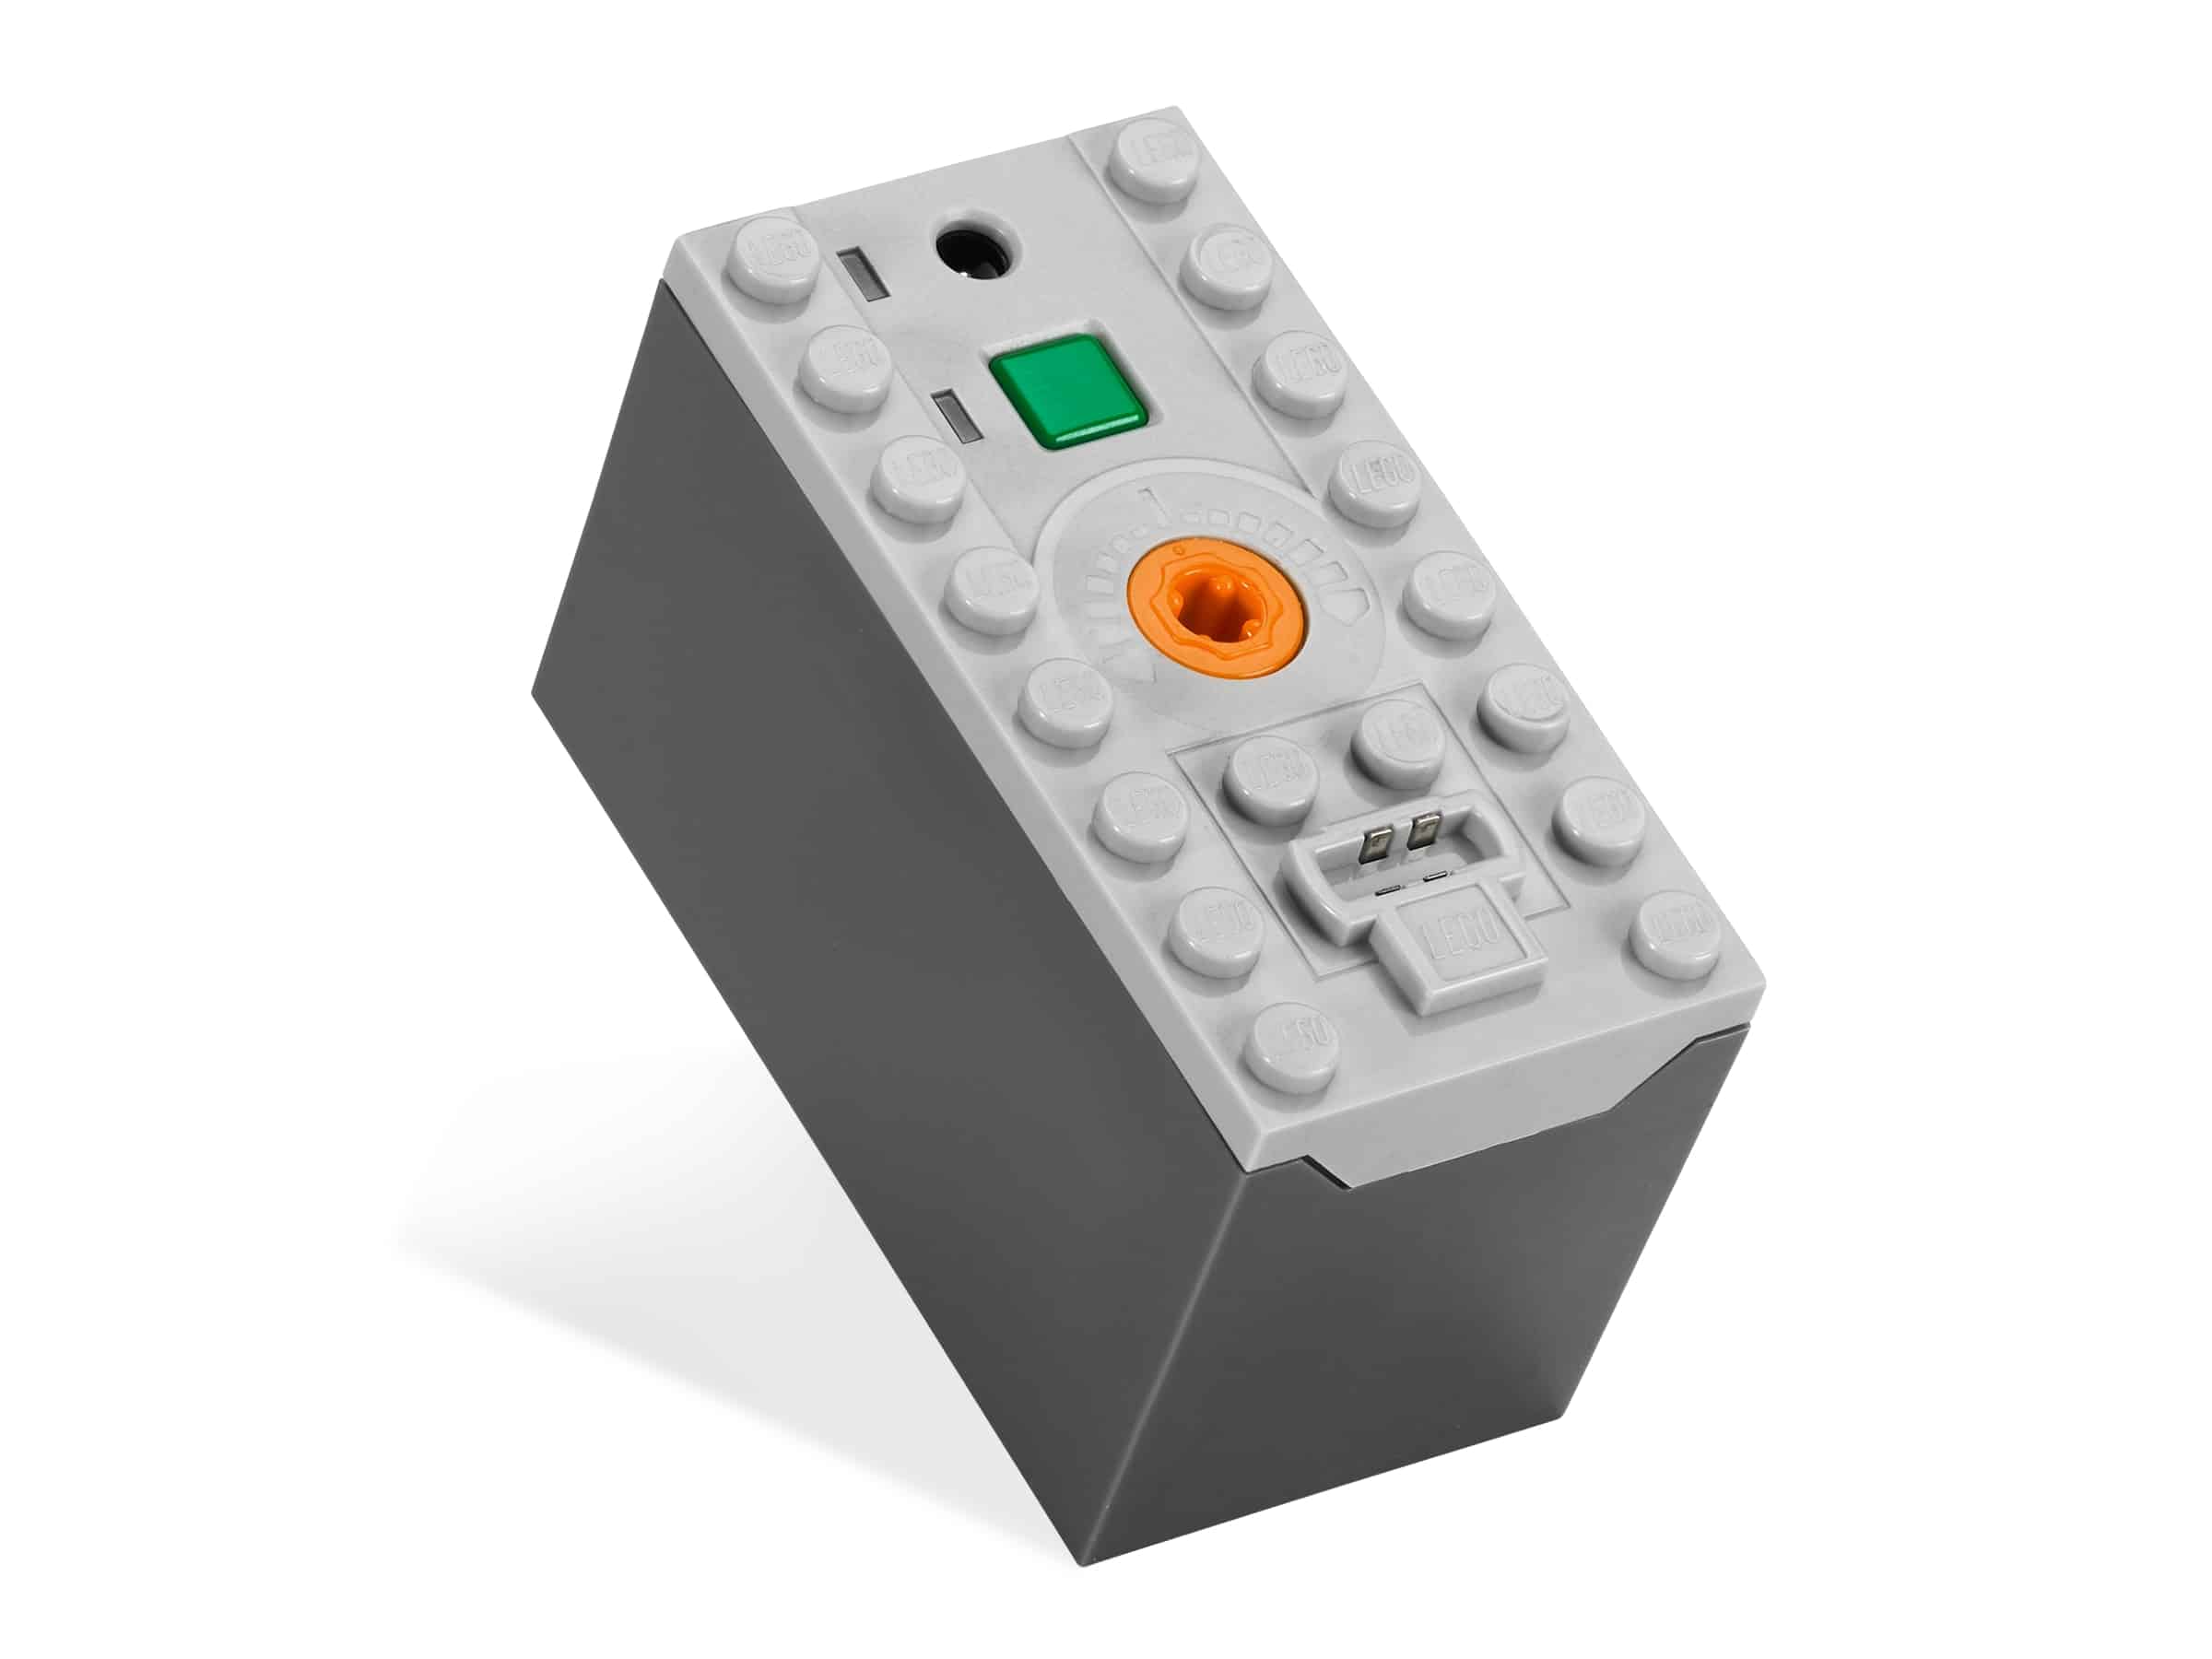 lego 8878 power functions rechargeable battery